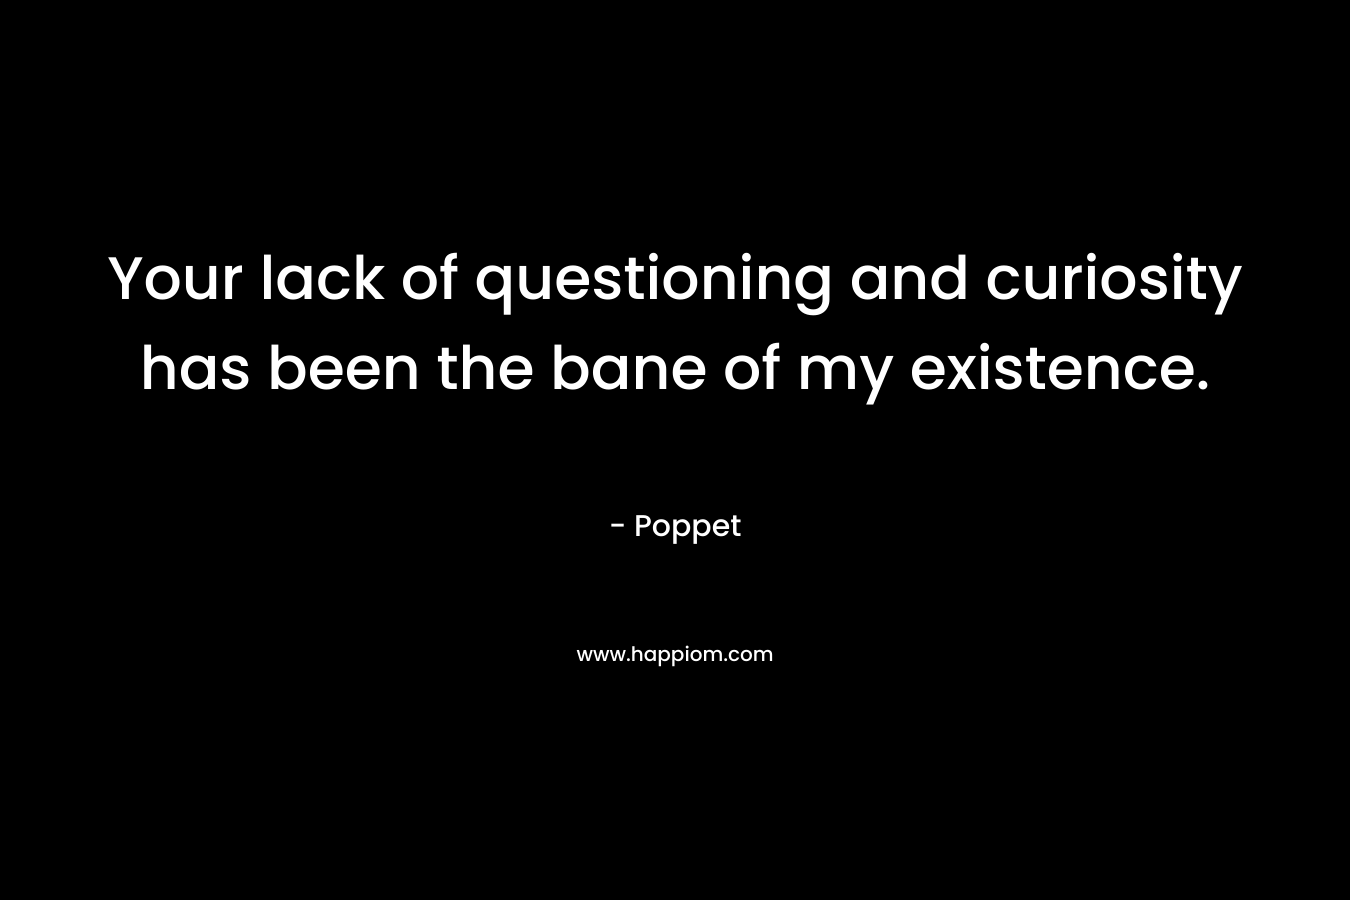 Your lack of questioning and curiosity has been the bane of my existence. – Poppet